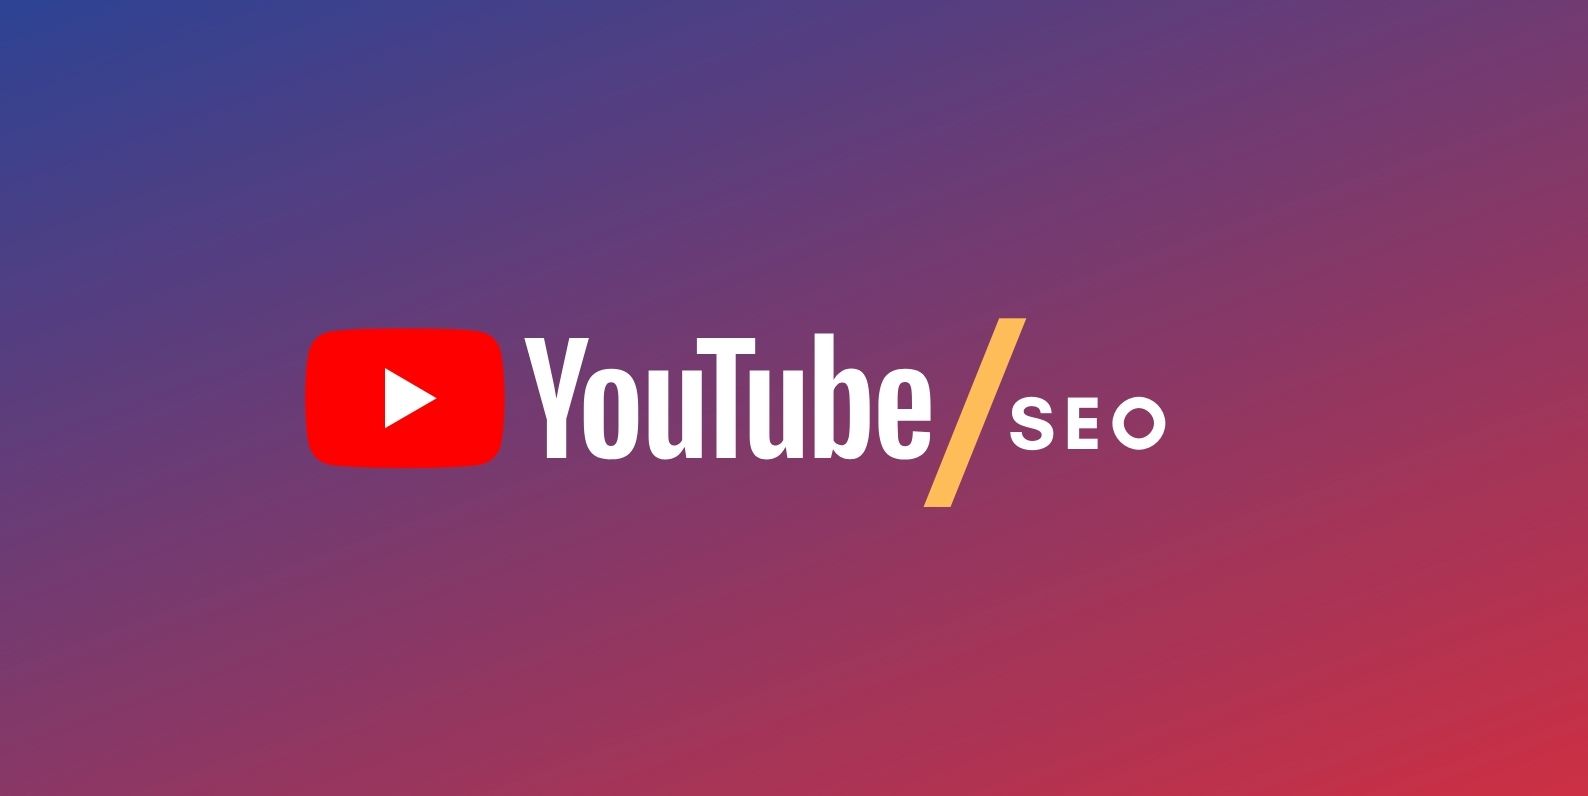 Youtube SEO guide that helps you to rank videos